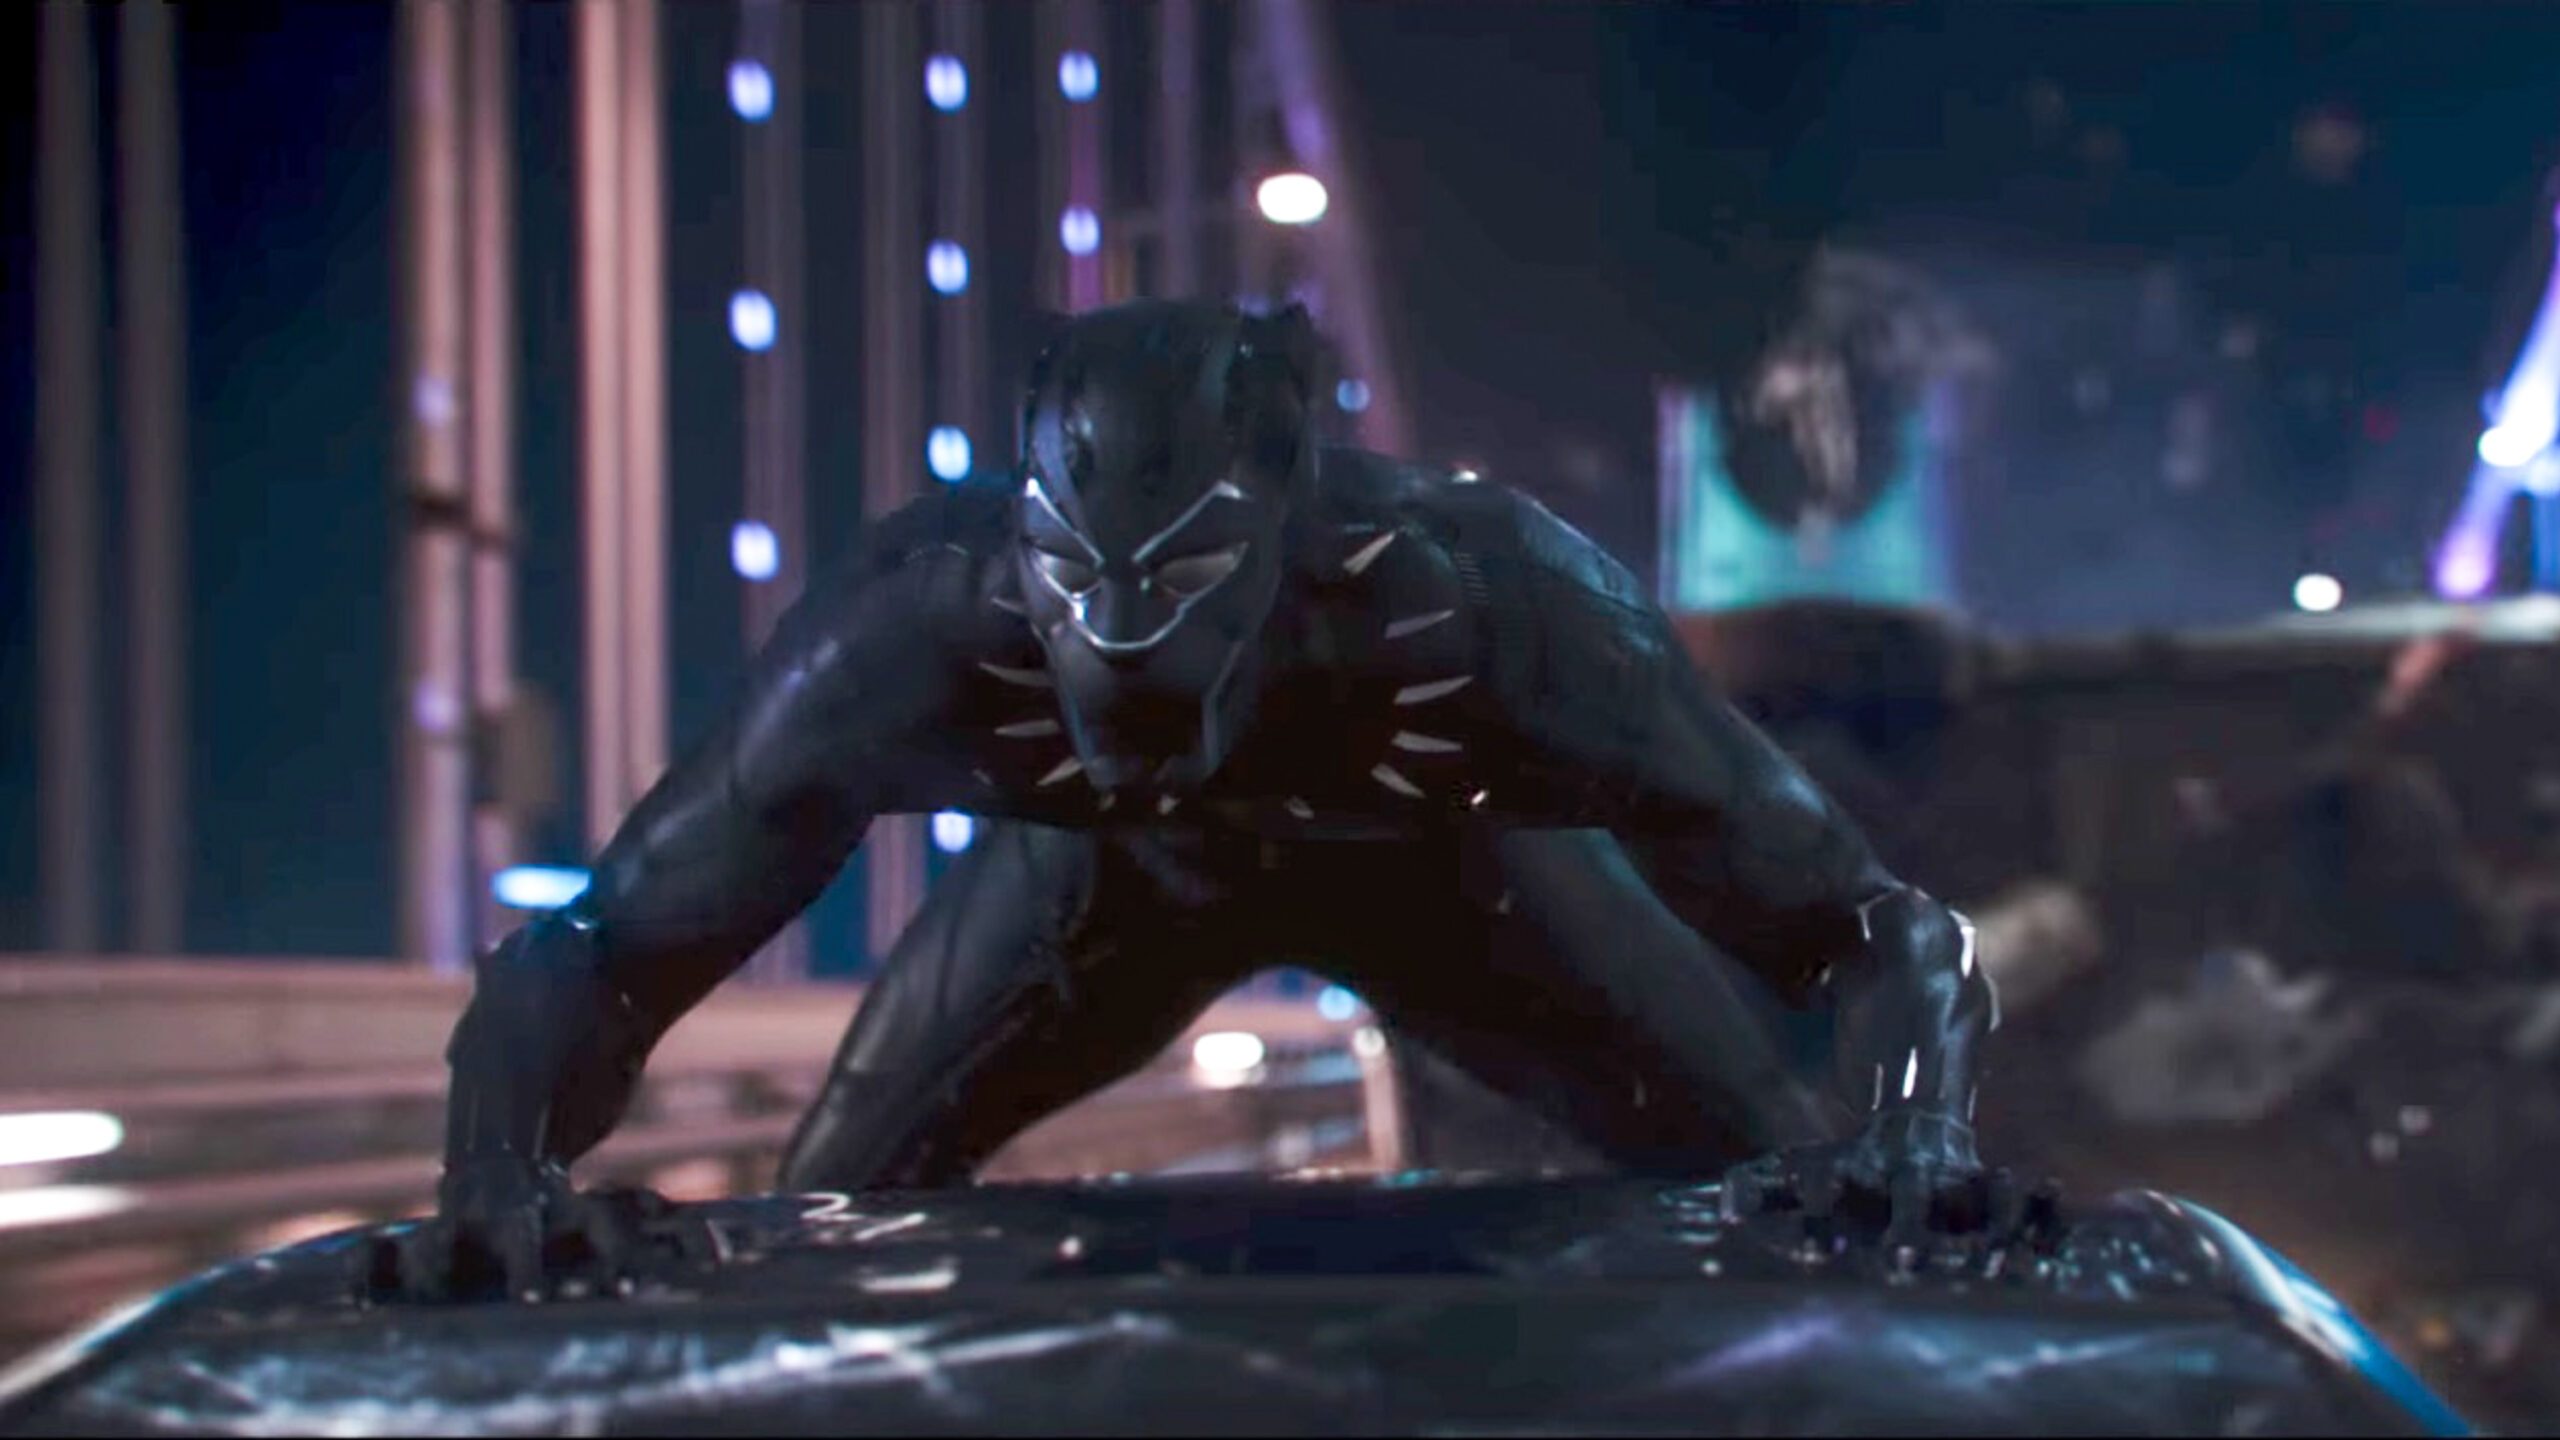 WATCH: First trailer for Marvel’s ‘Black Panther’ released